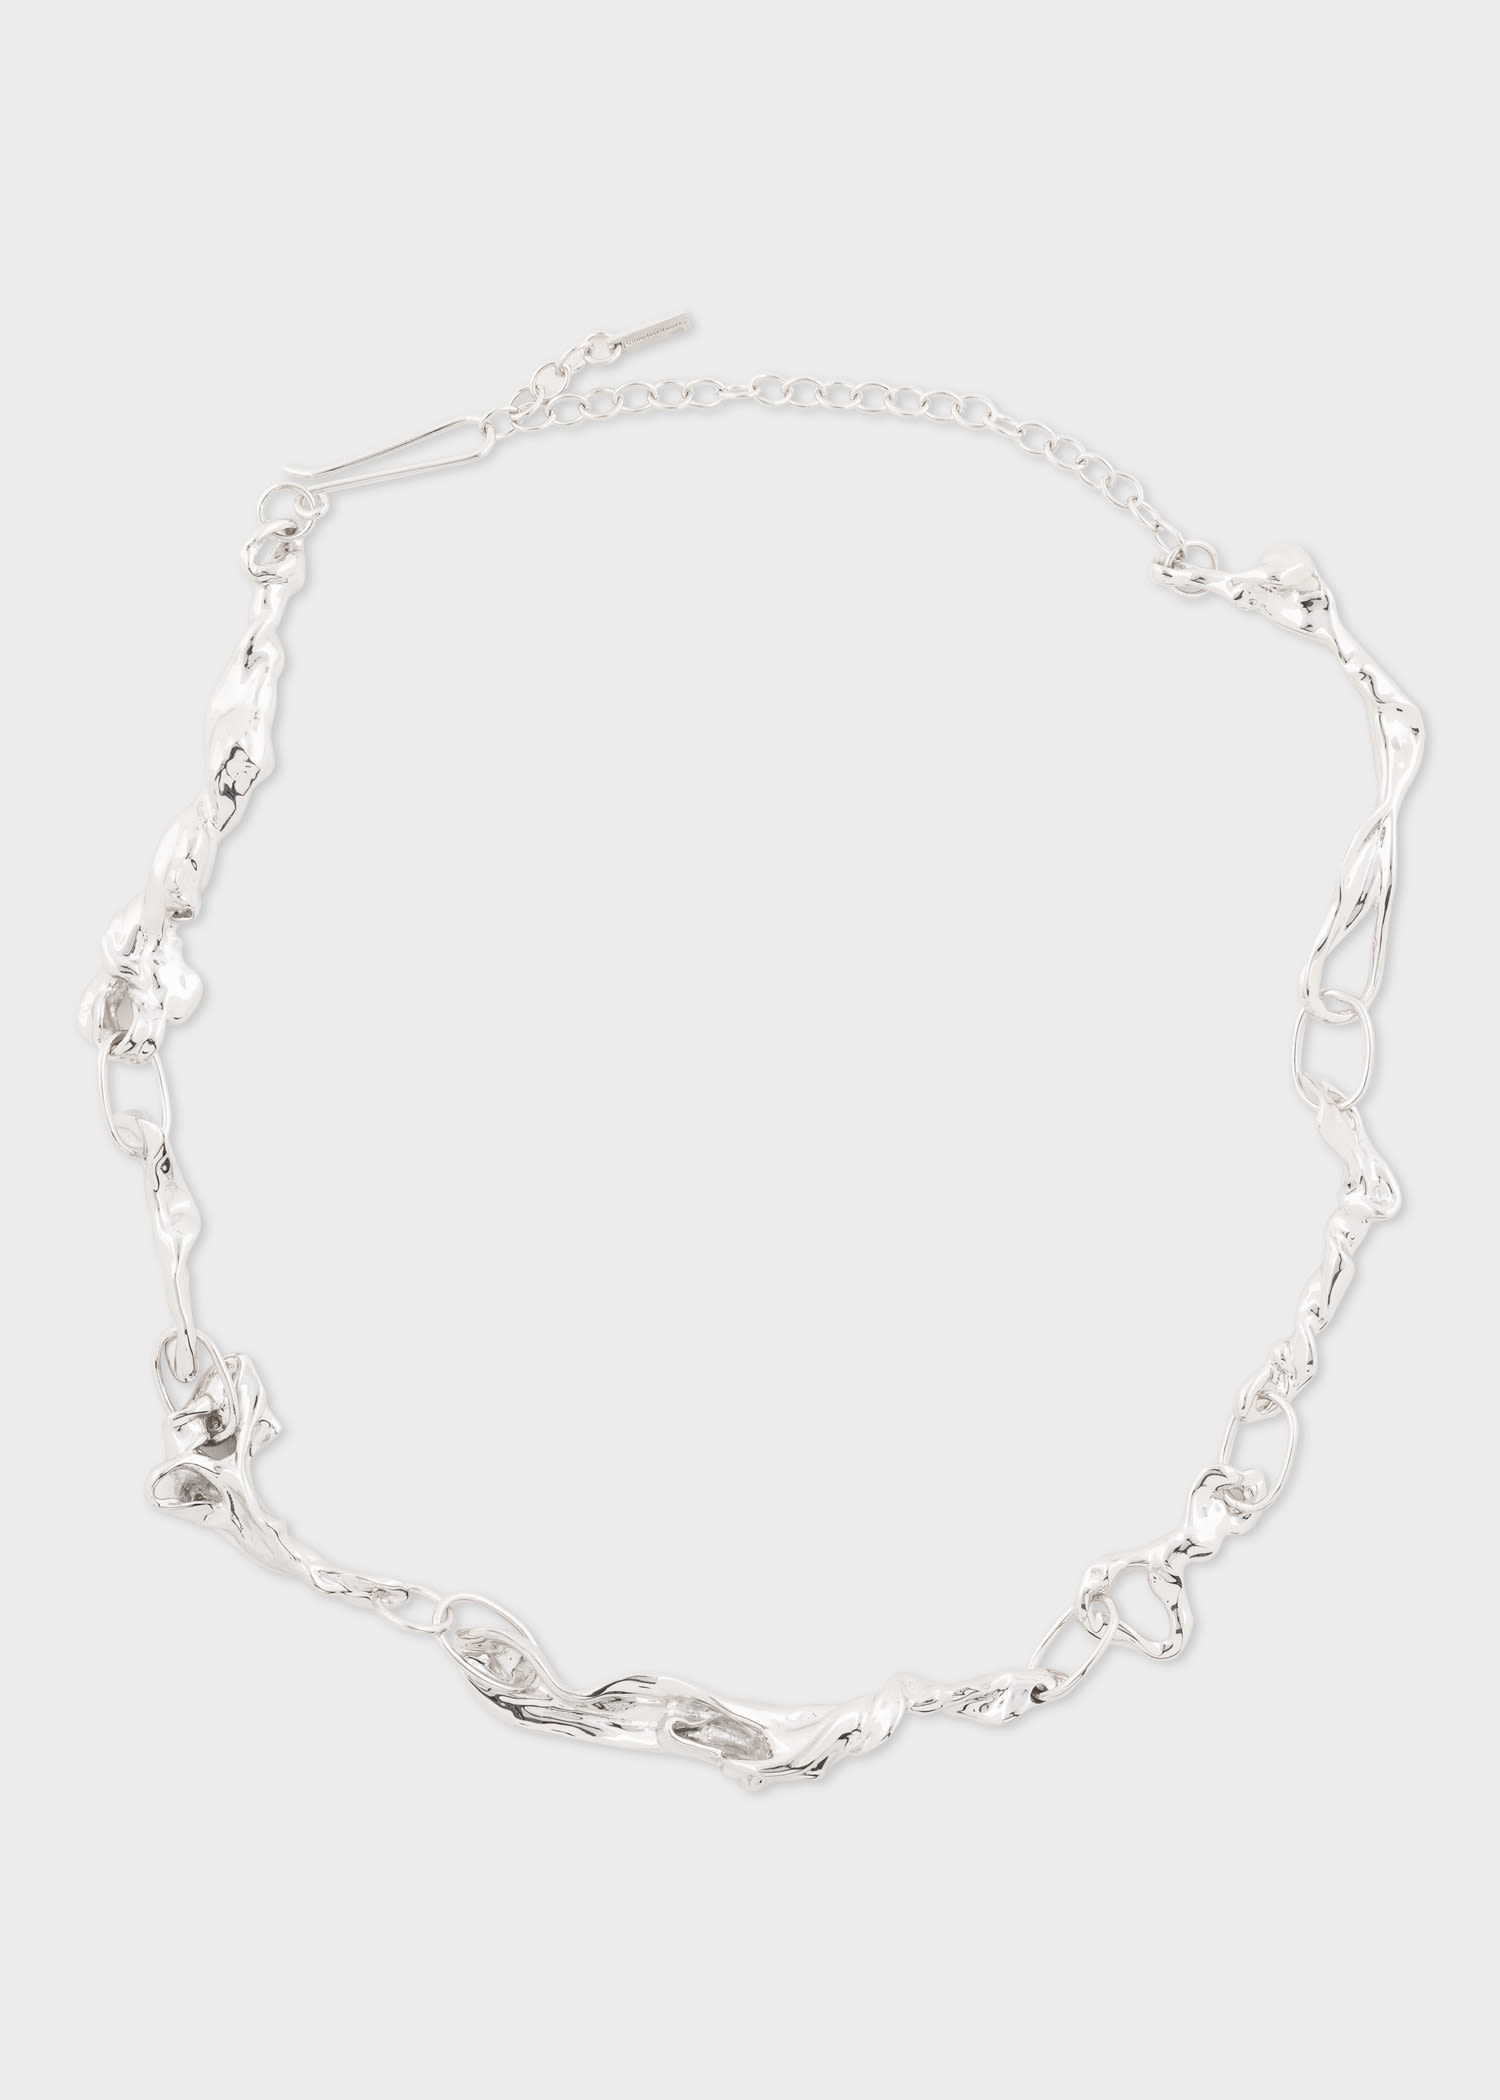 'Treacle' Rhodium Necklace by Completedworks - 2